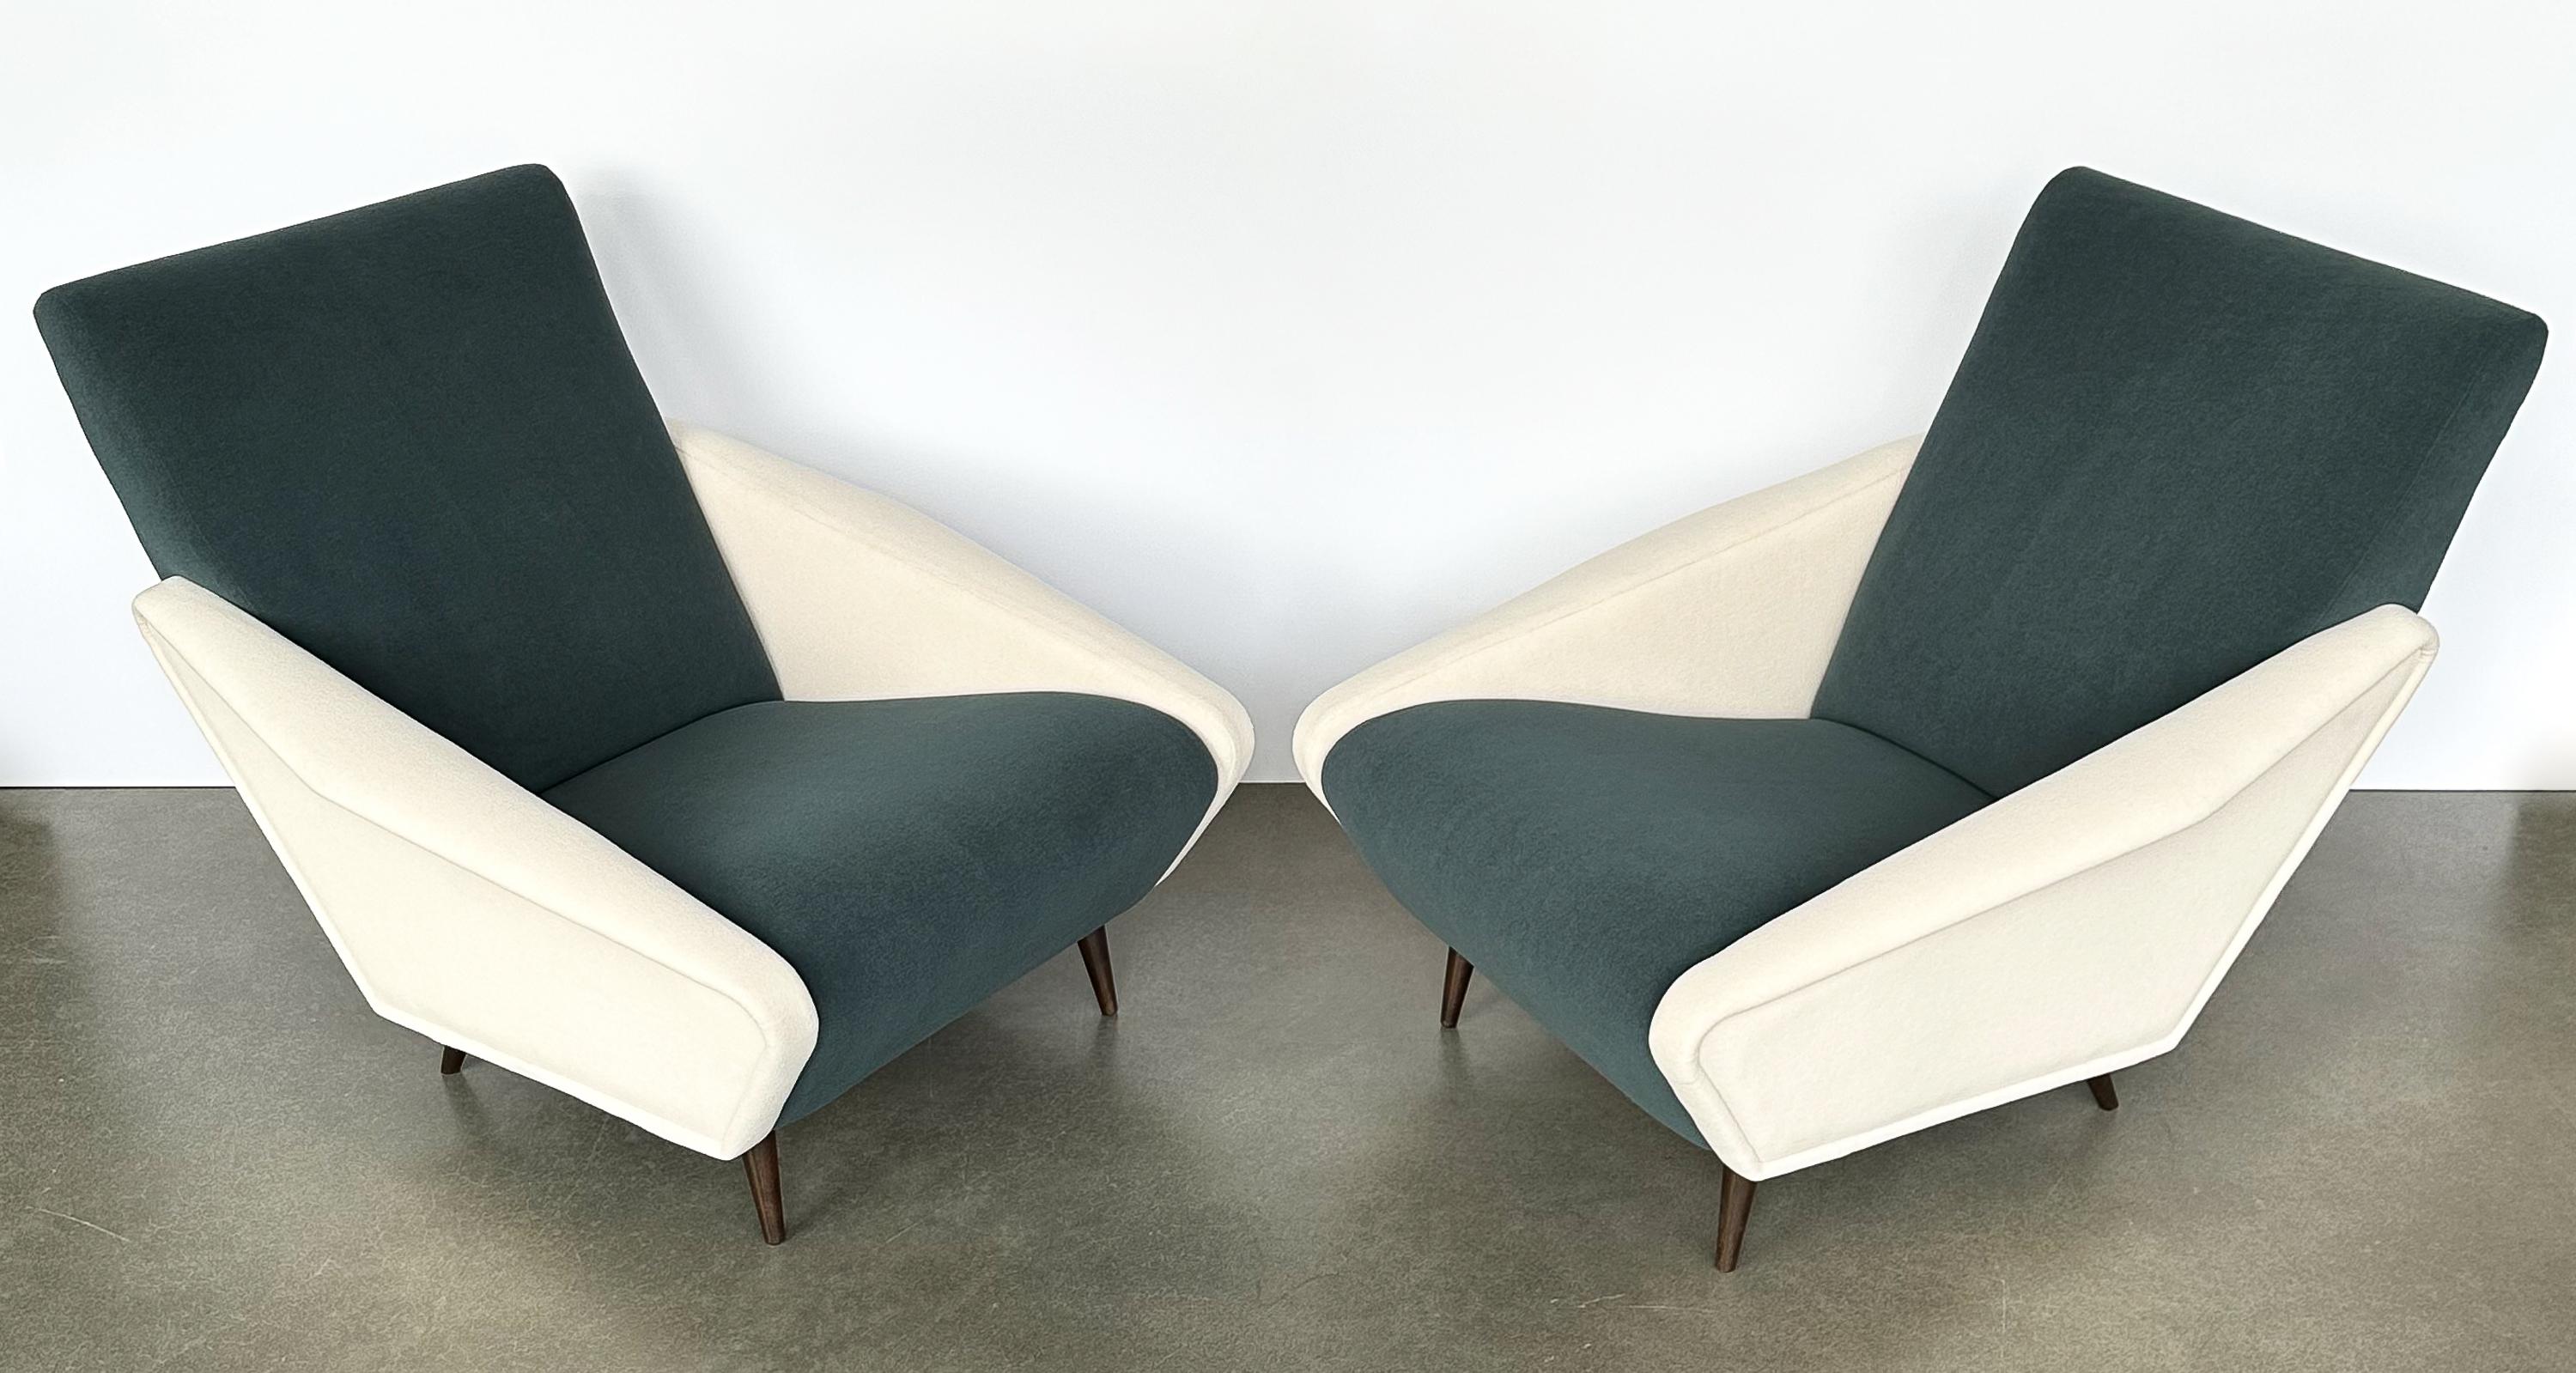 This rare pair of iconic Distex lounge chairs by Gio Ponti for Cassina, Italy circa 1950s, represent a pivotal moment in design history, encapsulating the radical postwar aesthetic that Ponti was instrumental in shaping. Model 807, designed in 1953